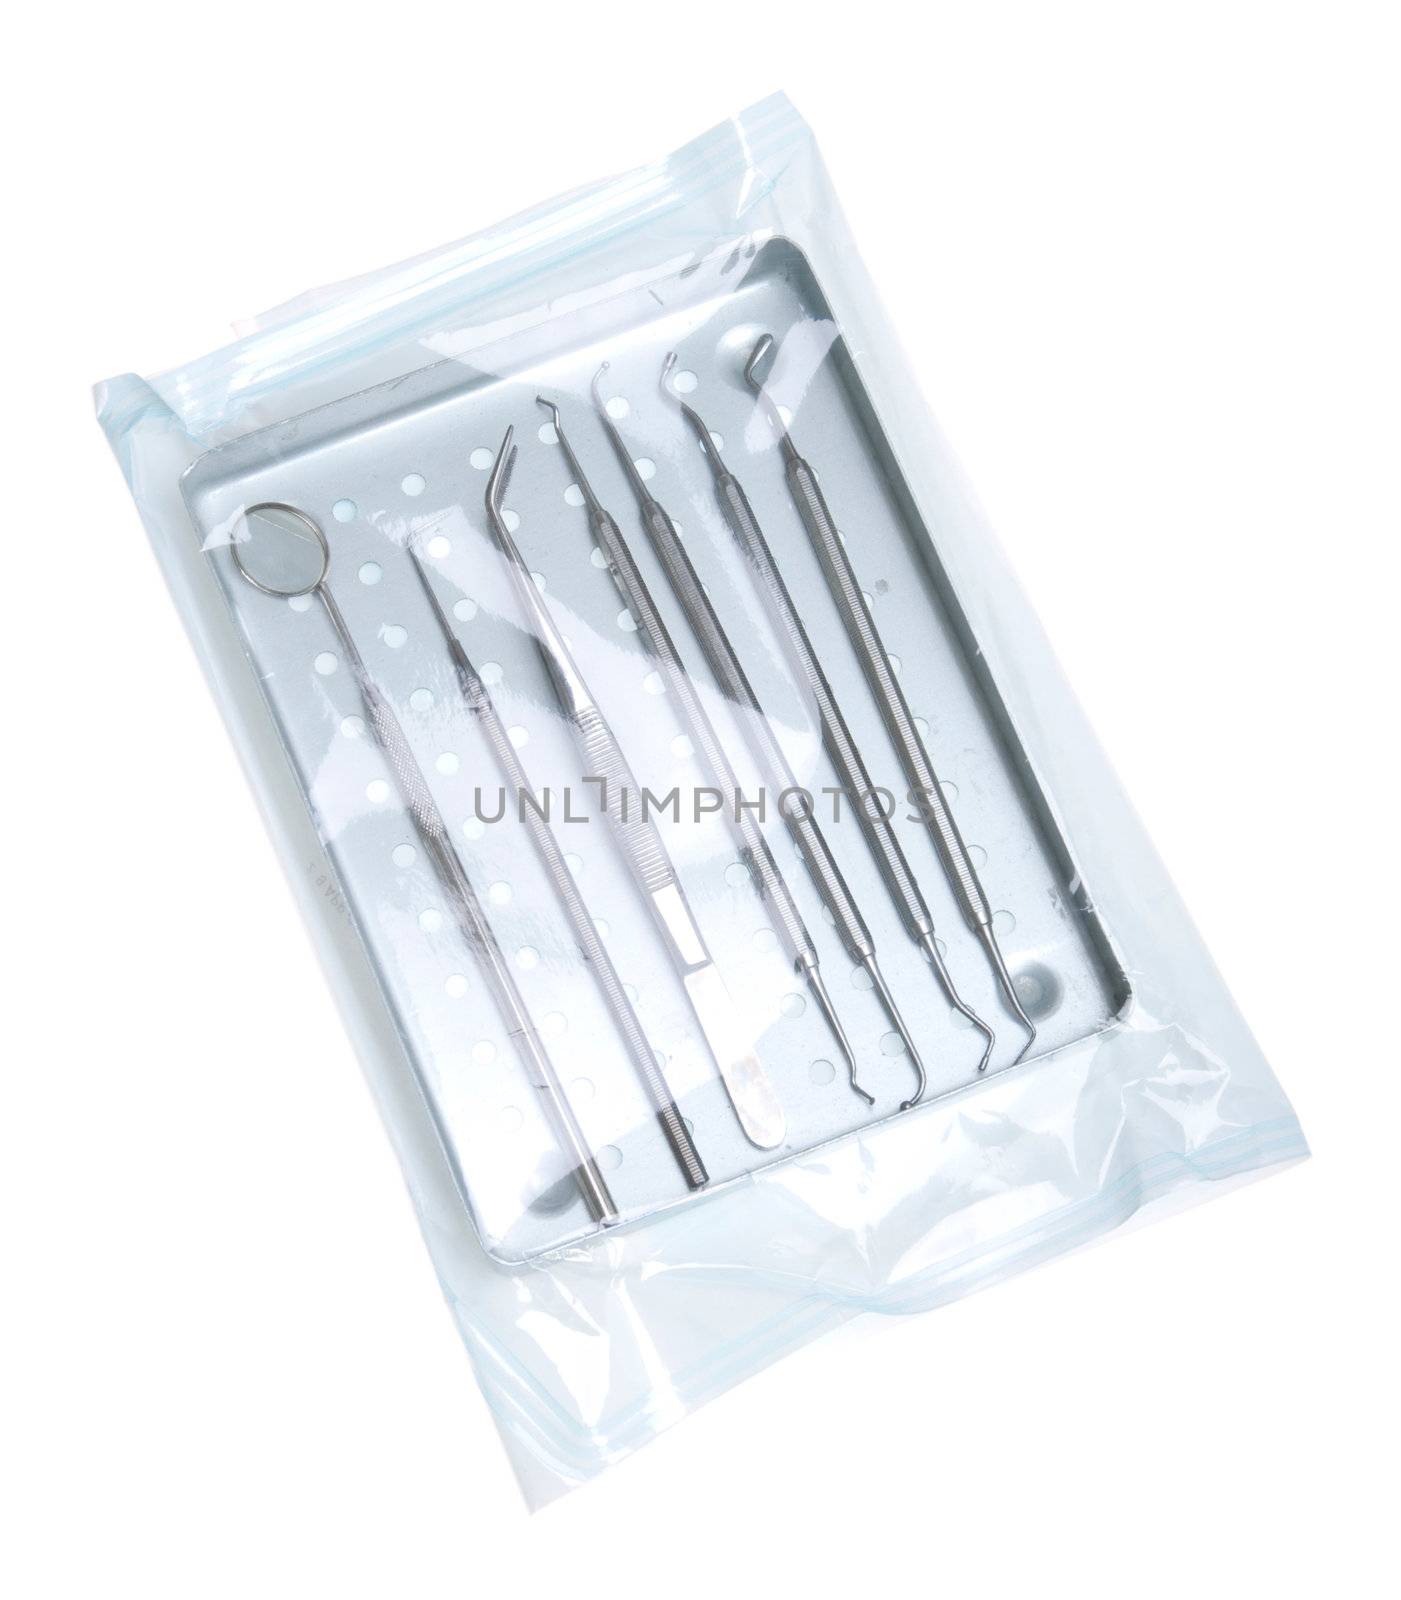 dentistry start kit in a tray on a sterilized pouch (isolated on white background)